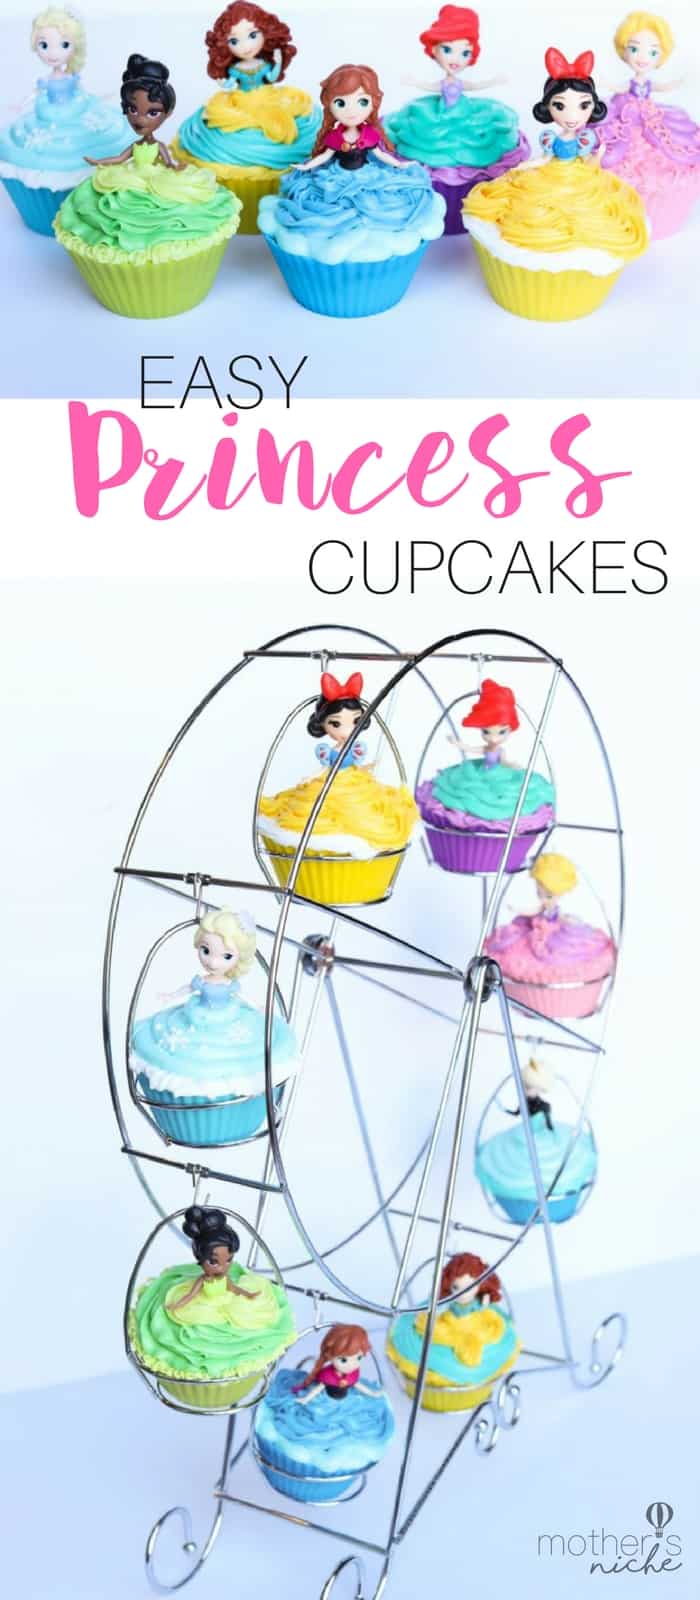 Easy Princess cupcakes that can easily be made into a princess birthday cake.